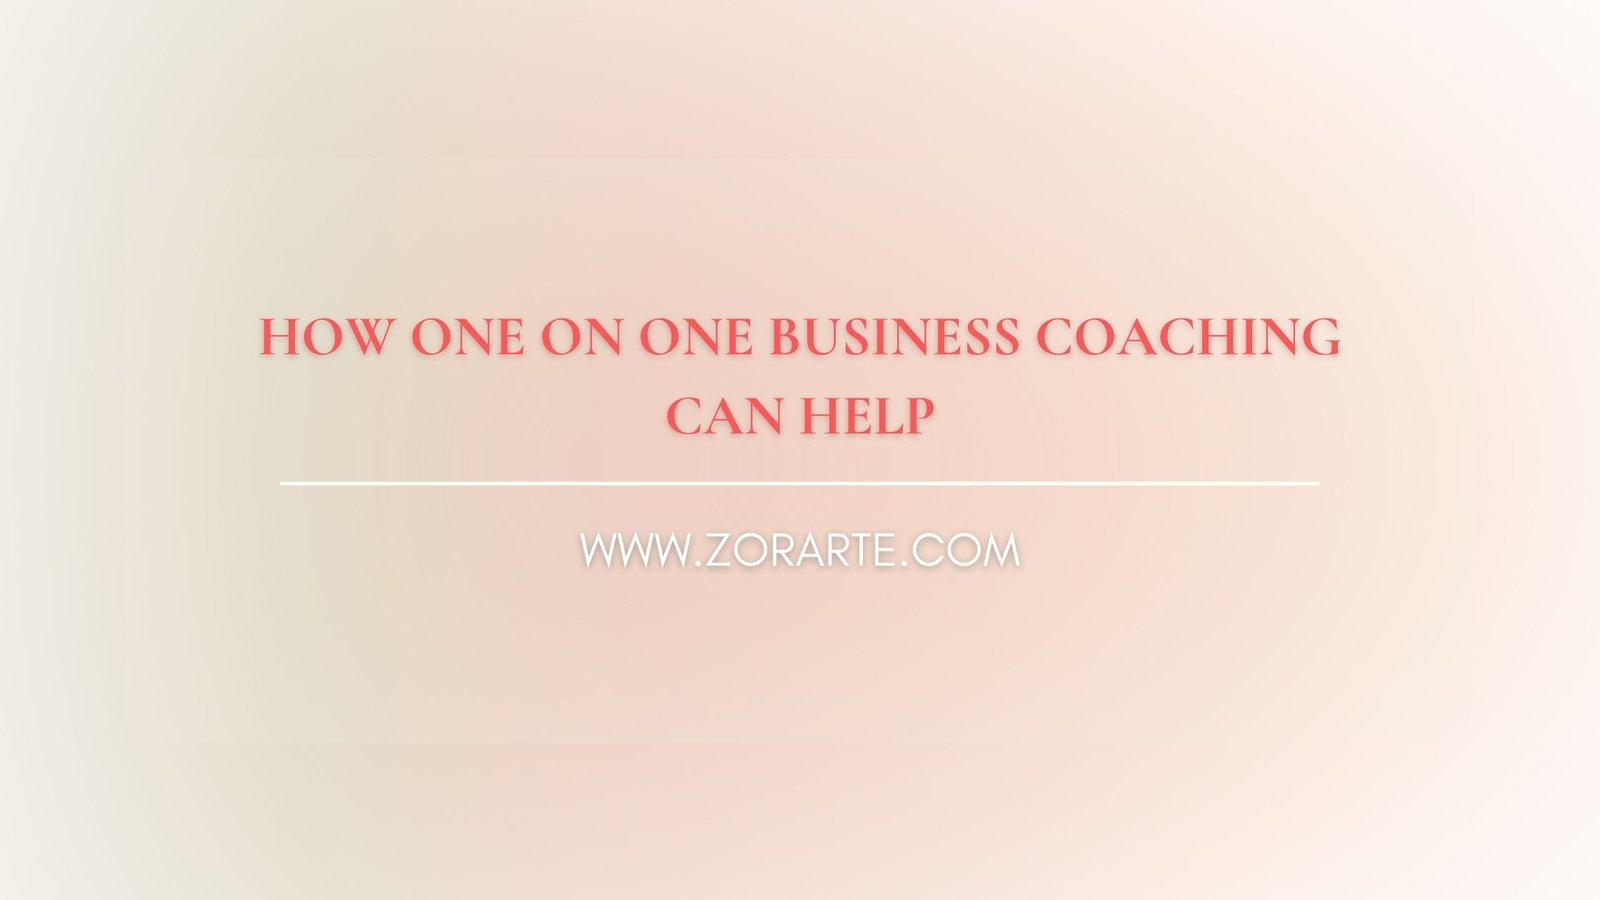 How One on One Business Coaching Can Help